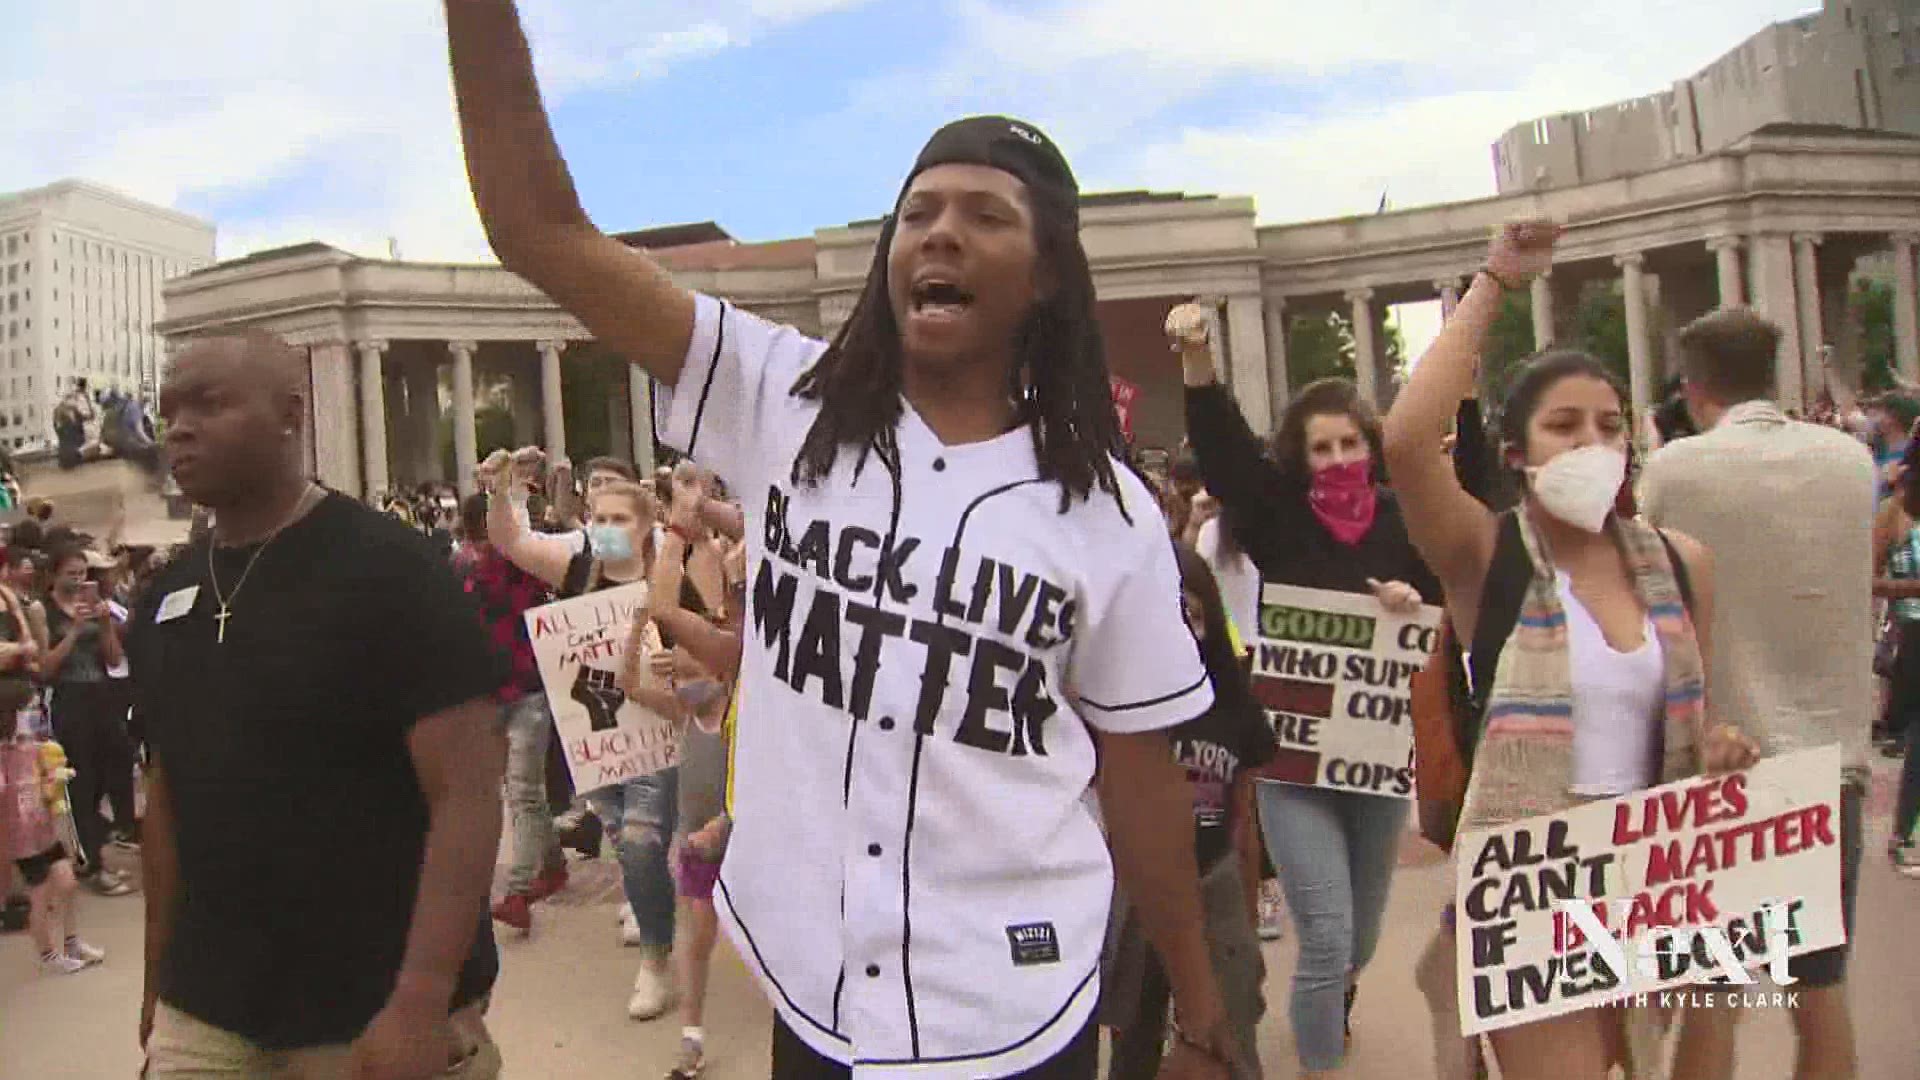 A University of Denver assistant professor studied this summer's Black Lives Matter protests and asked why this movement led to change, while others haven't.